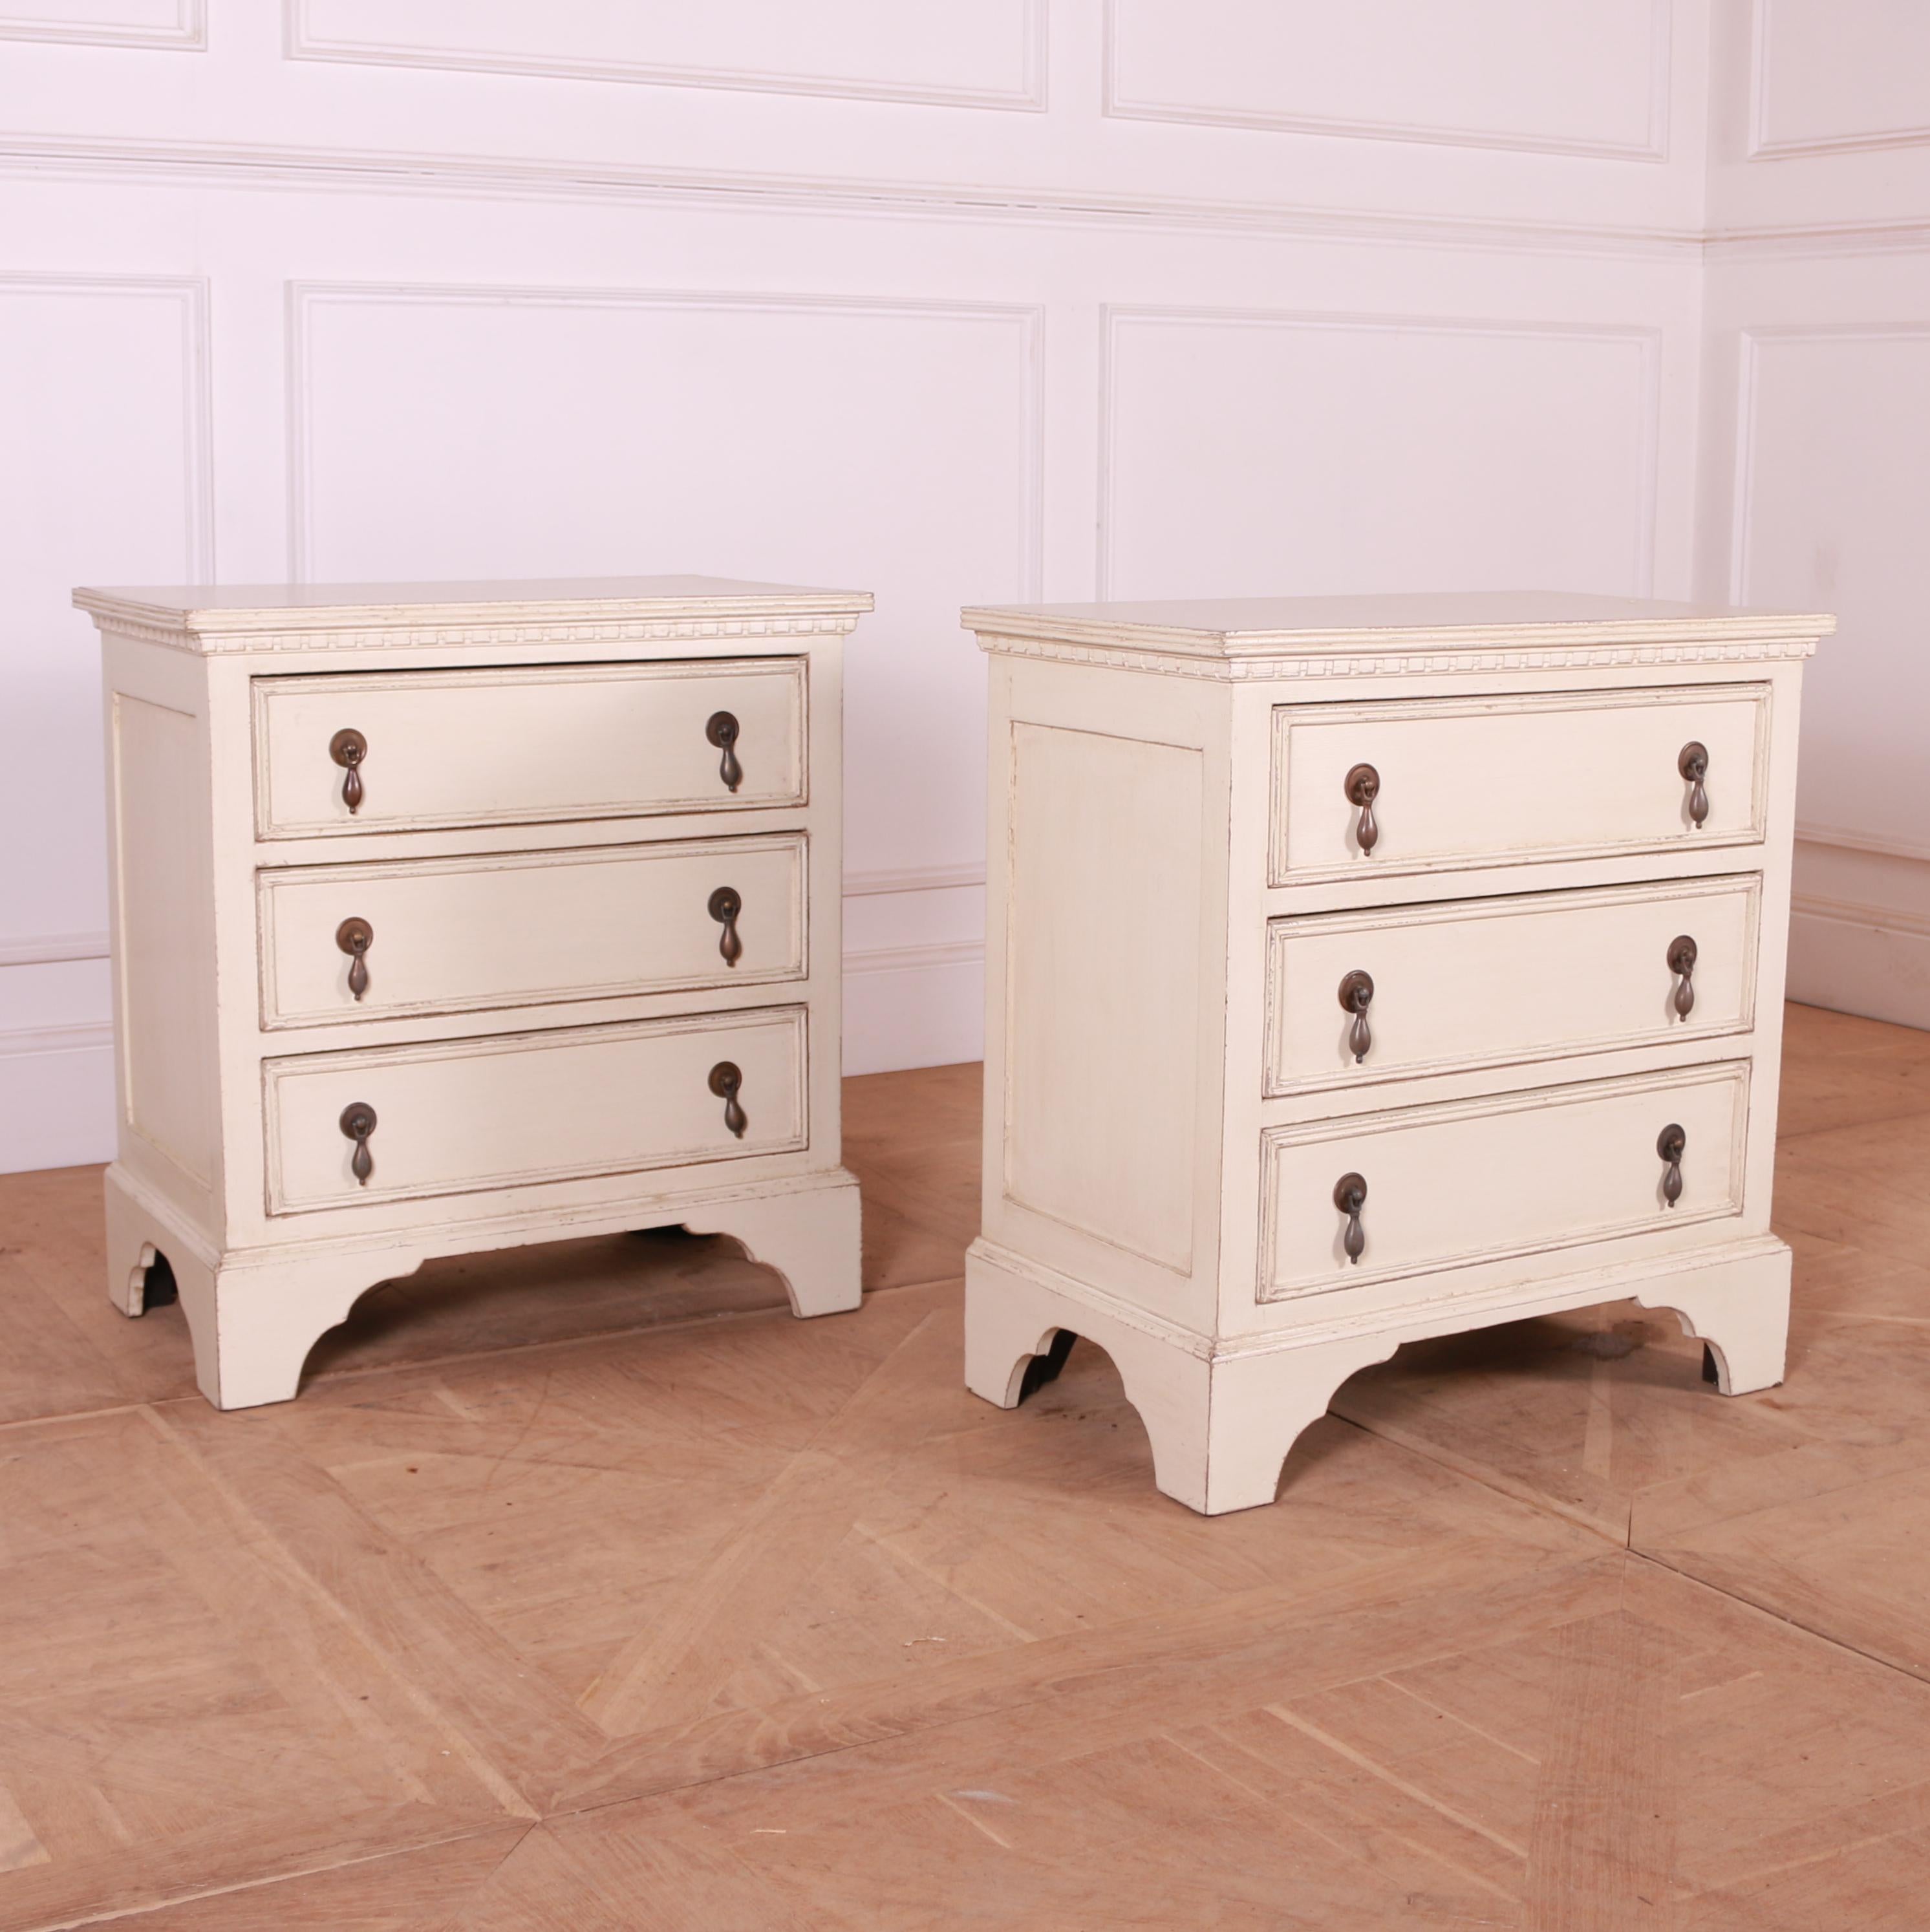 Pair of custom made small painted pine bedside chest of drawers.



Dimensions
26.5 inches (67 cms) Wide
15.5 inches (39 cms) Deep
28 inches (71 cms) High.